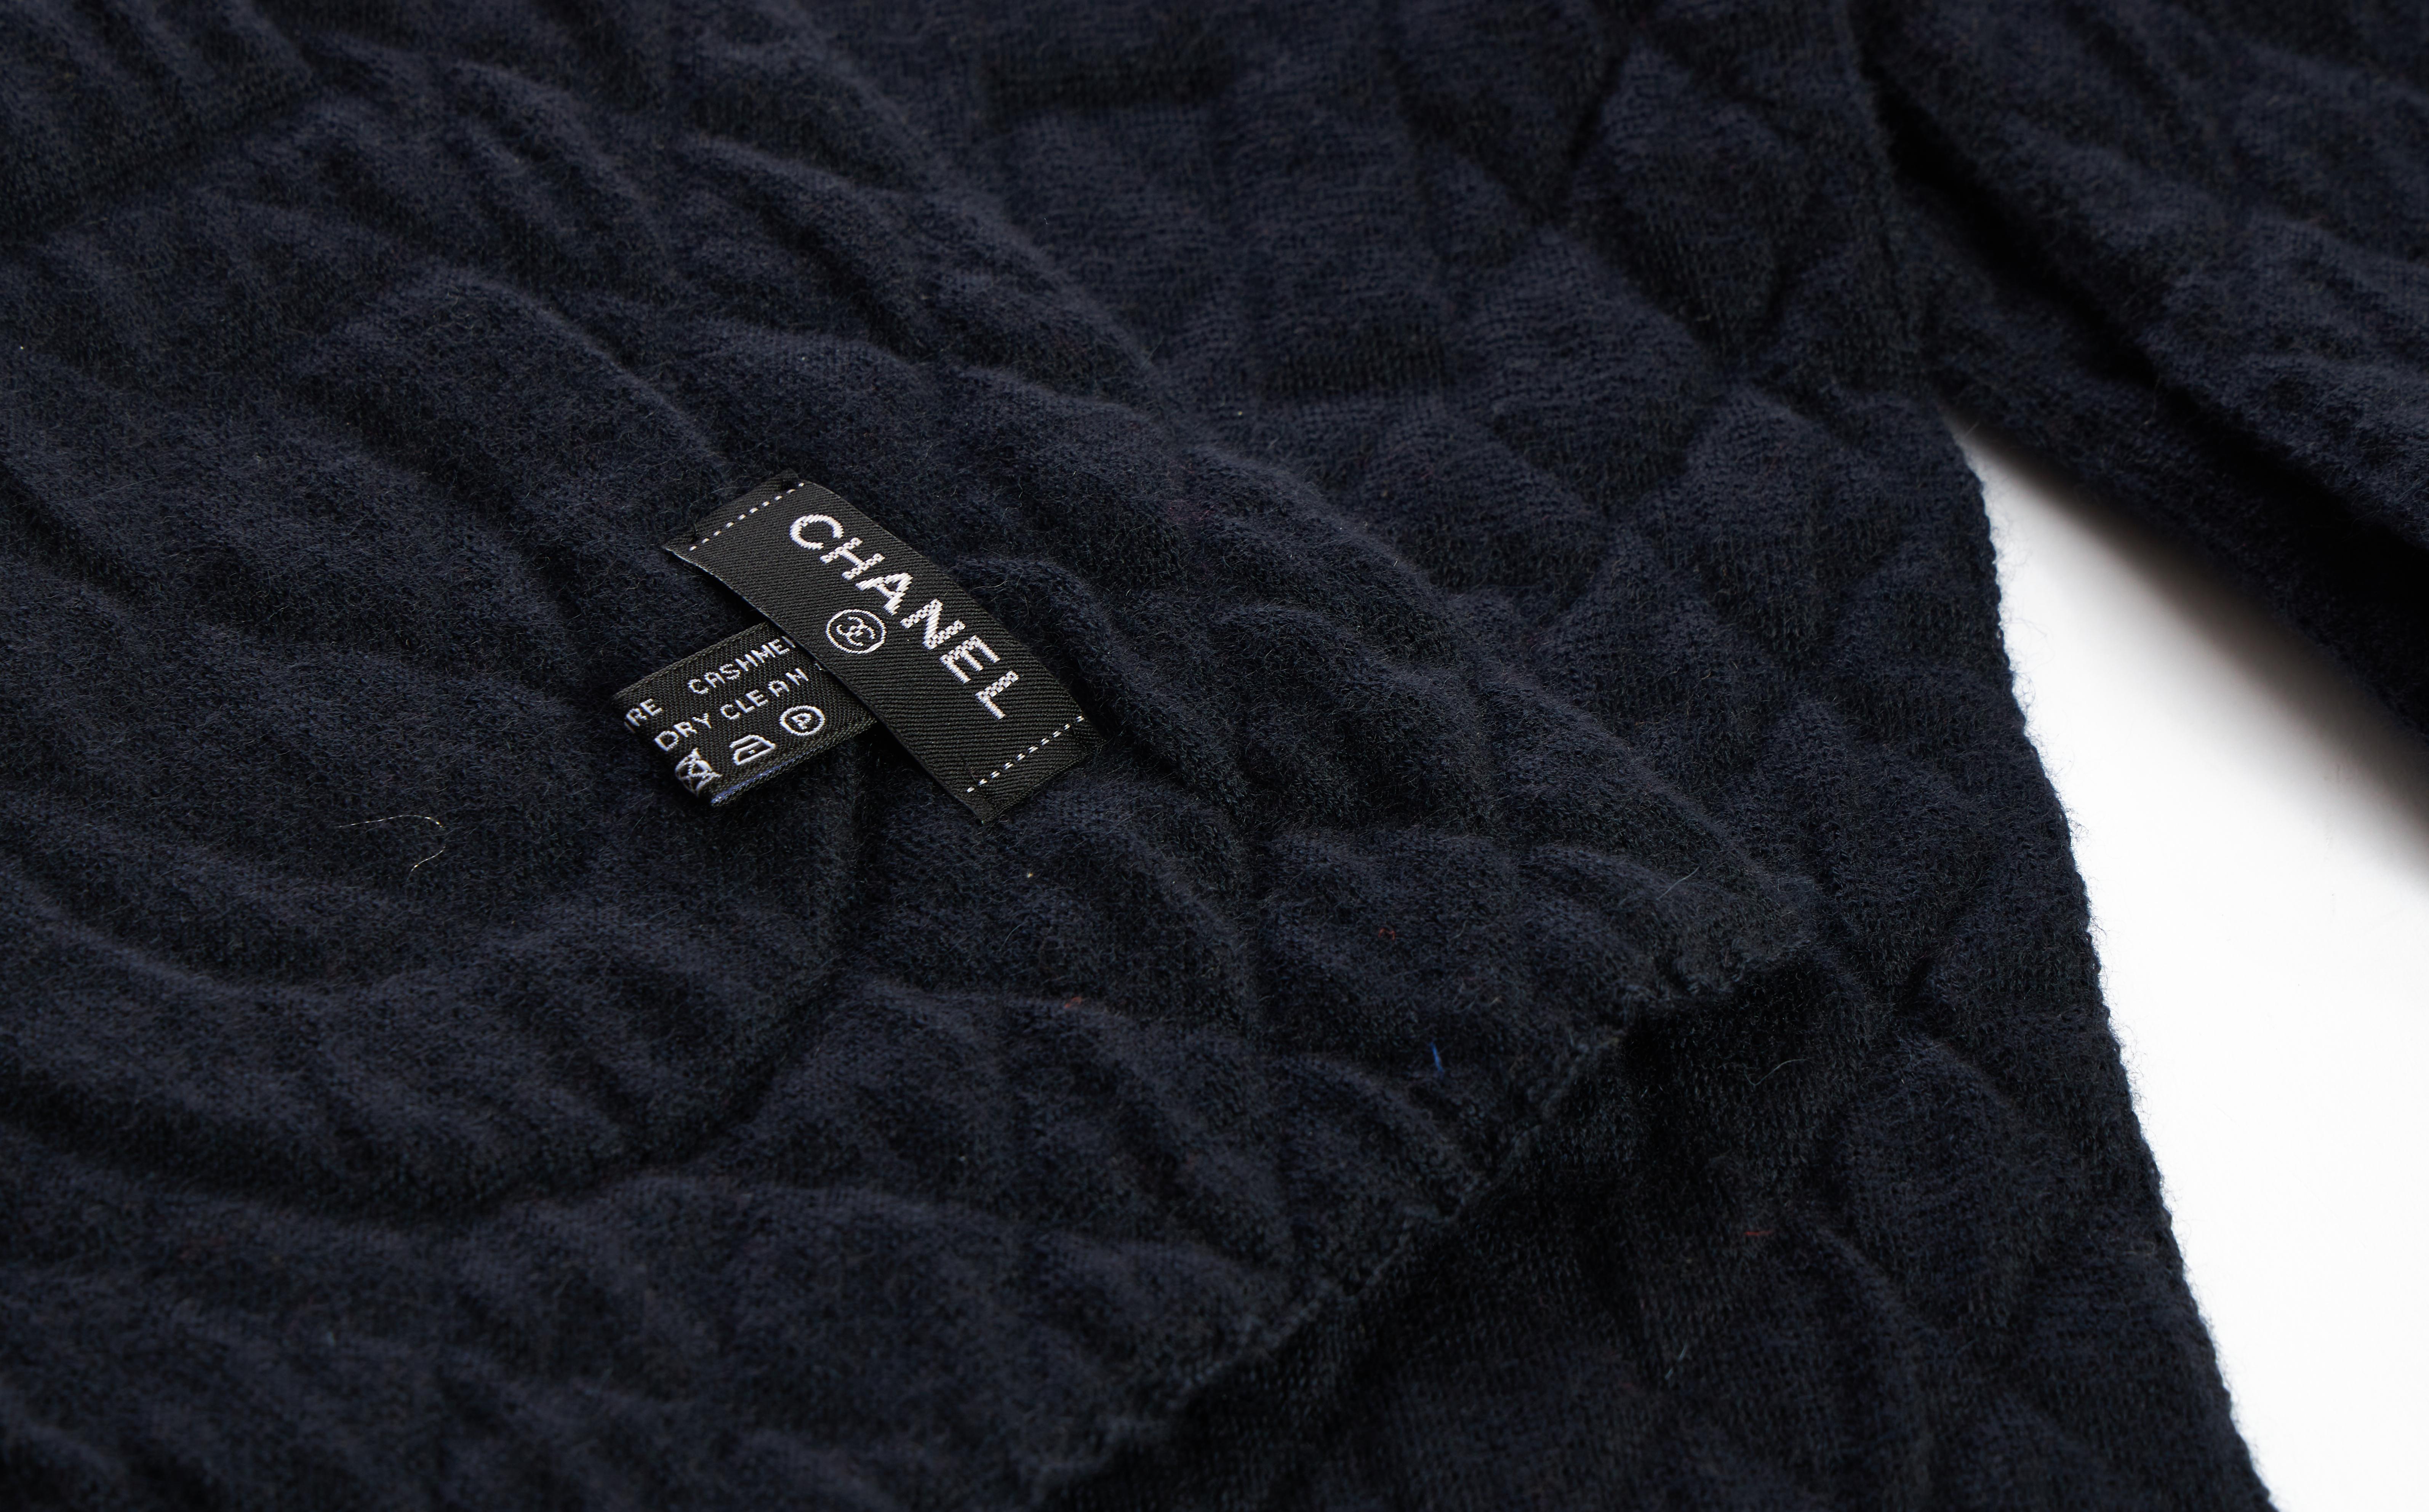 Chanel brand new and rare navy blue cashmere set. Beanie, gloves (small size 6 1/2) and quilted scarf. Come with original care tag.